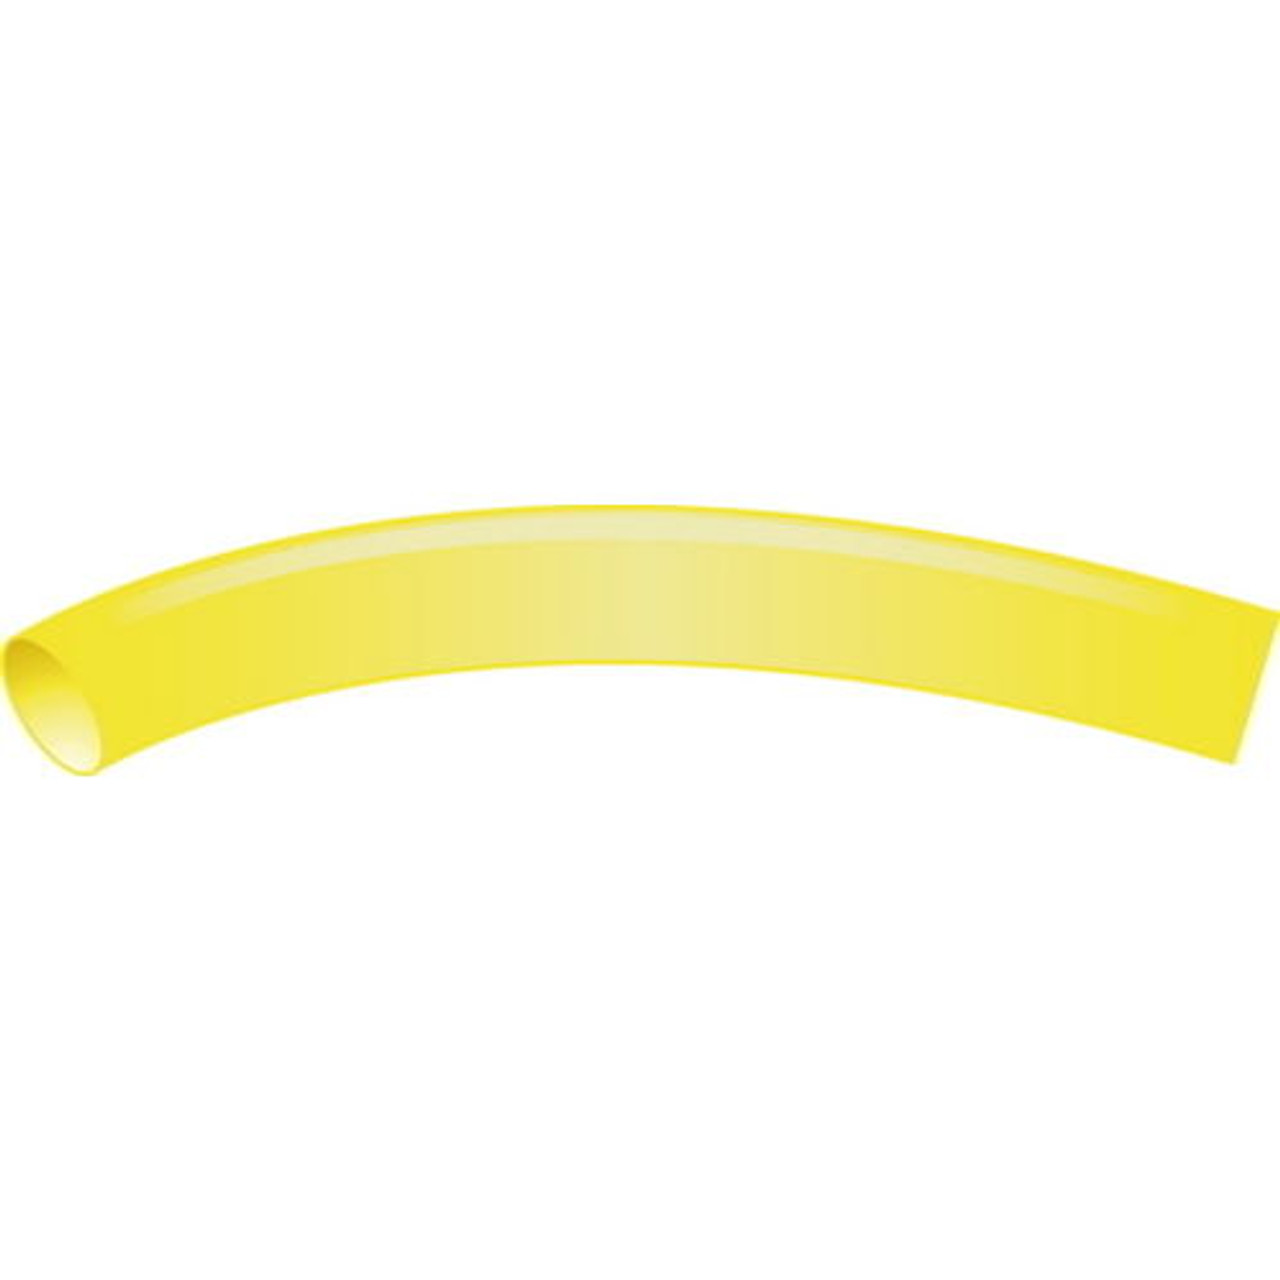 Yellow 1/4 Inch x 48 Inch 3:1 Heat Shrink Tubing with Sealant for Boats